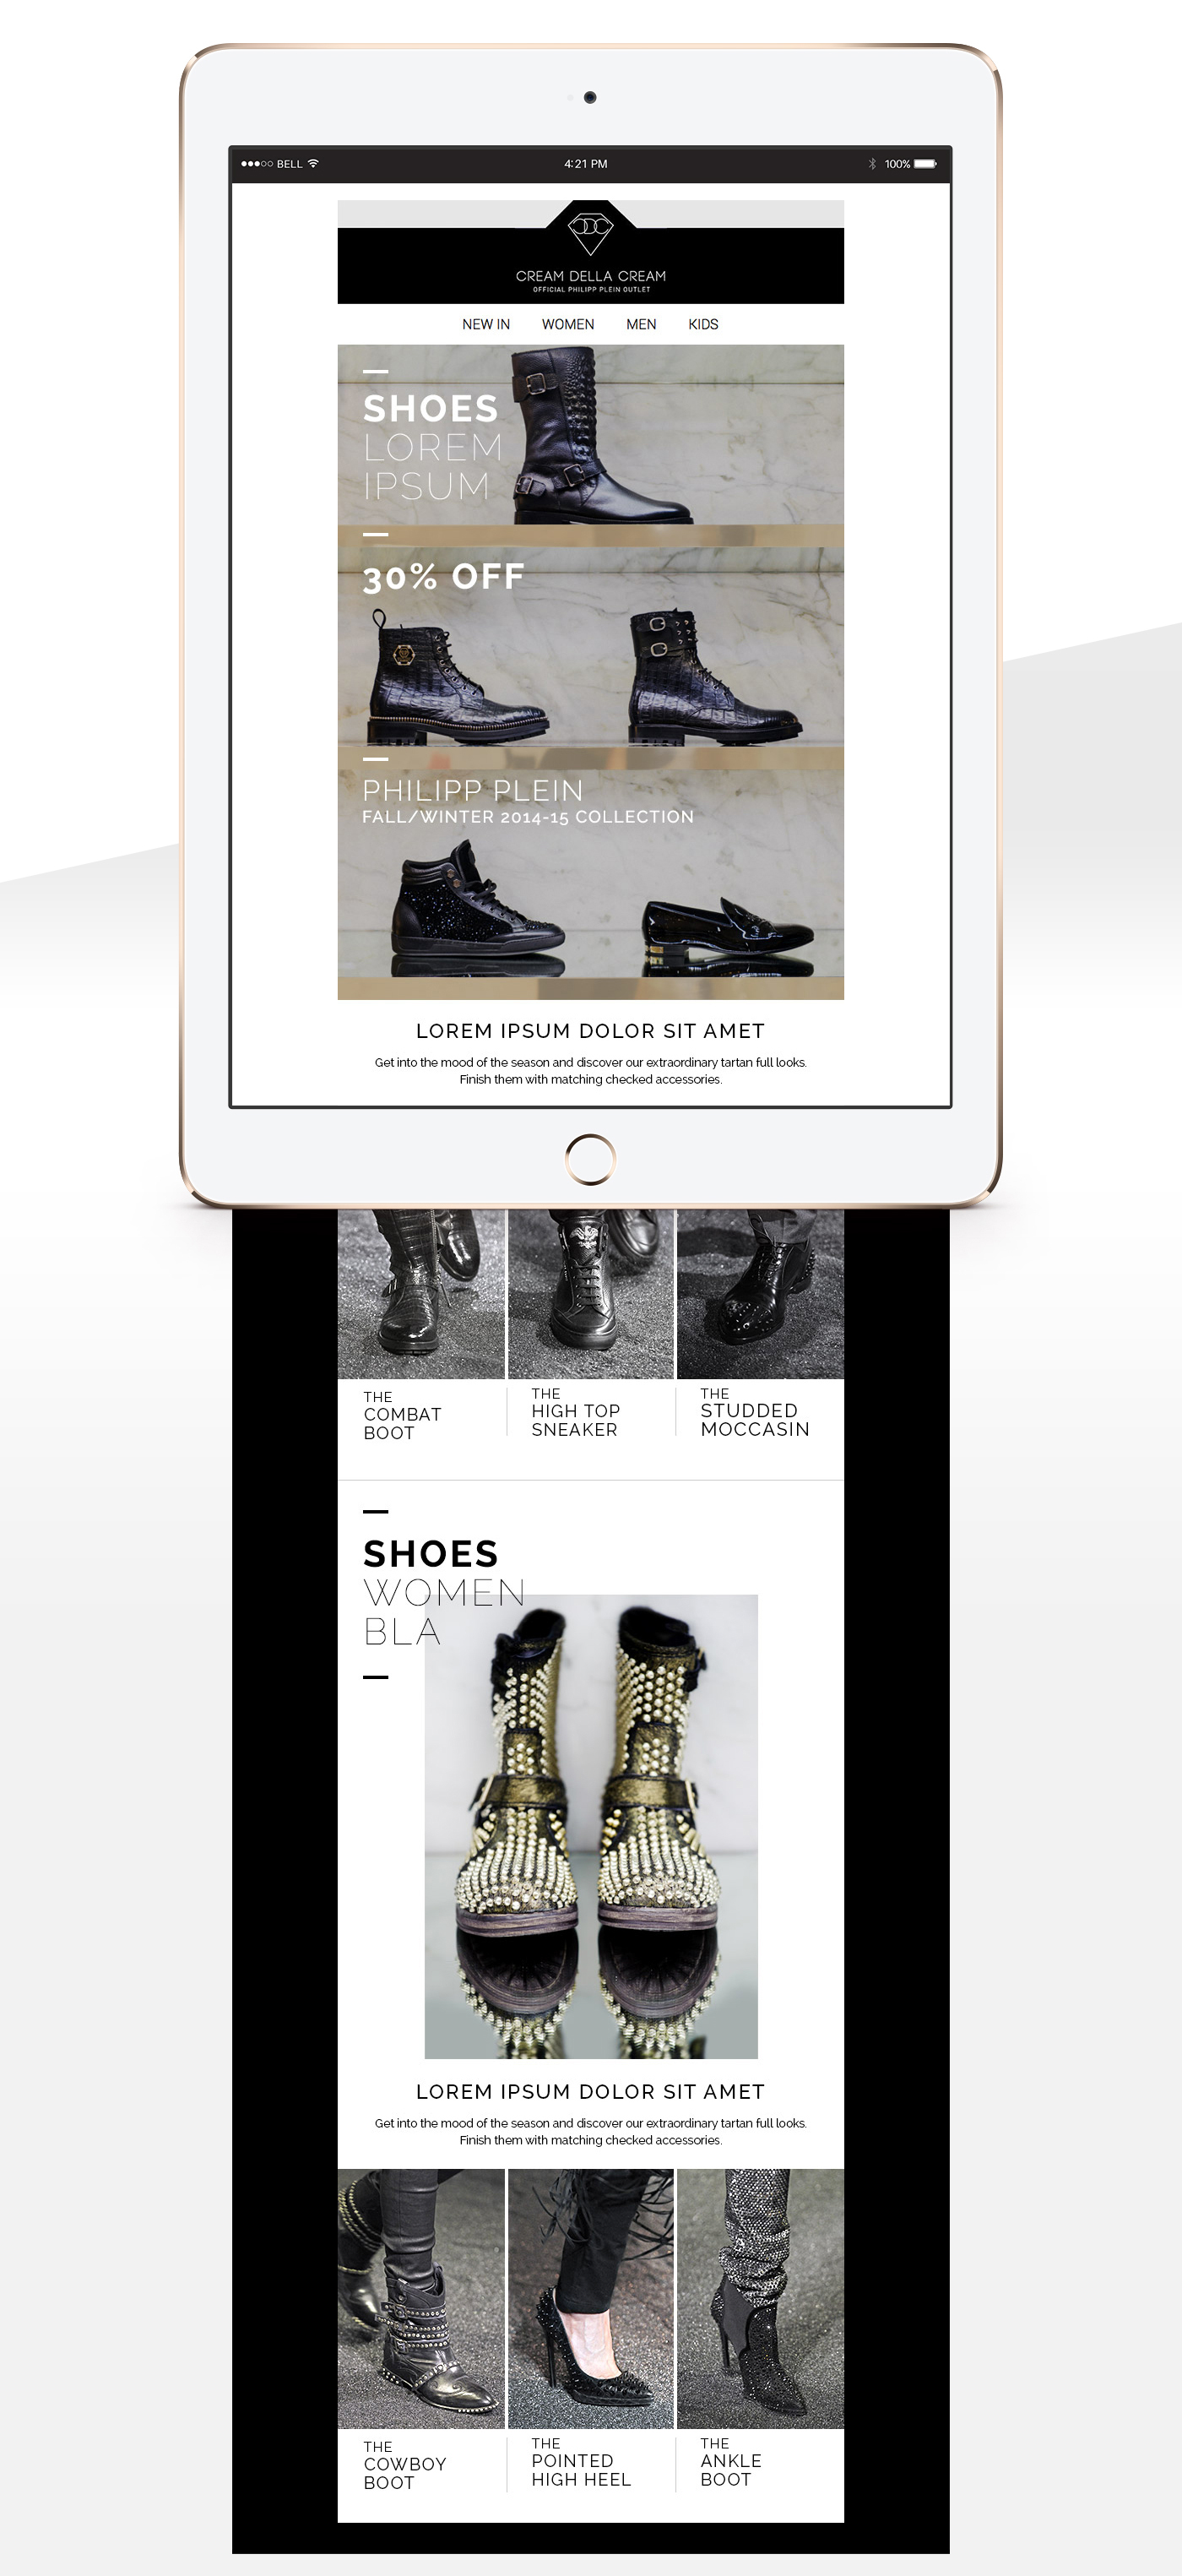 newsletter Philipp Plein  dem online shop direct Email marketing Email marketing   user interface email marketing Responsive Mockup Layout iphone iPad